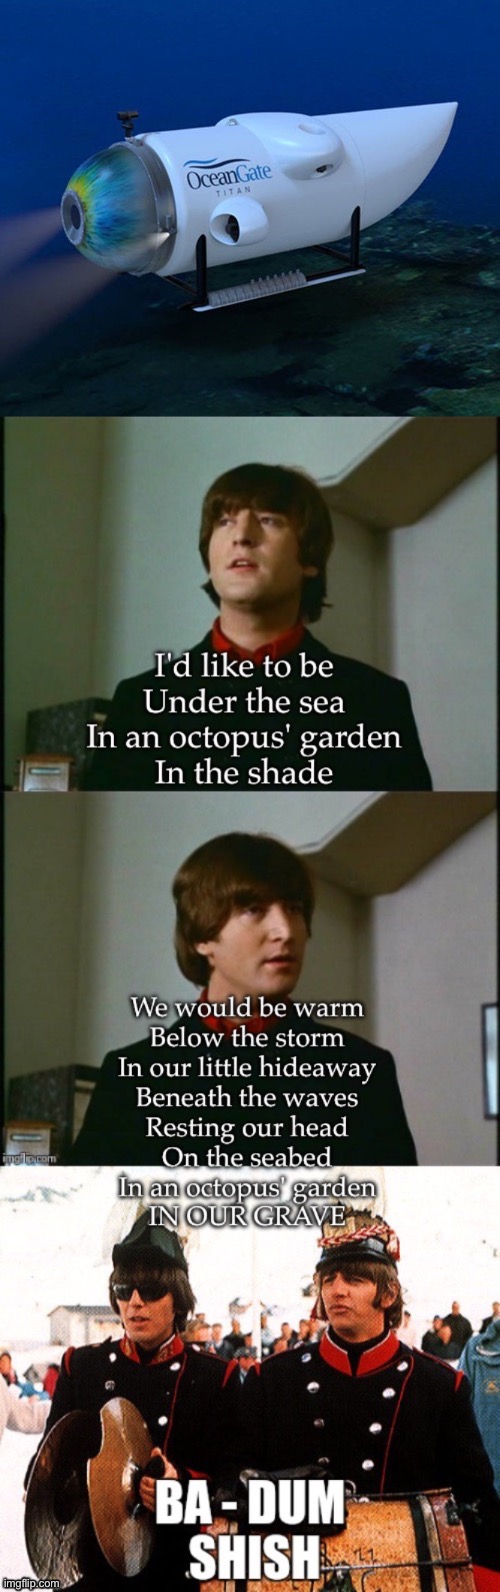 Underwater grave | image tagged in oceangate,grave,dead,the beatles | made w/ Imgflip meme maker